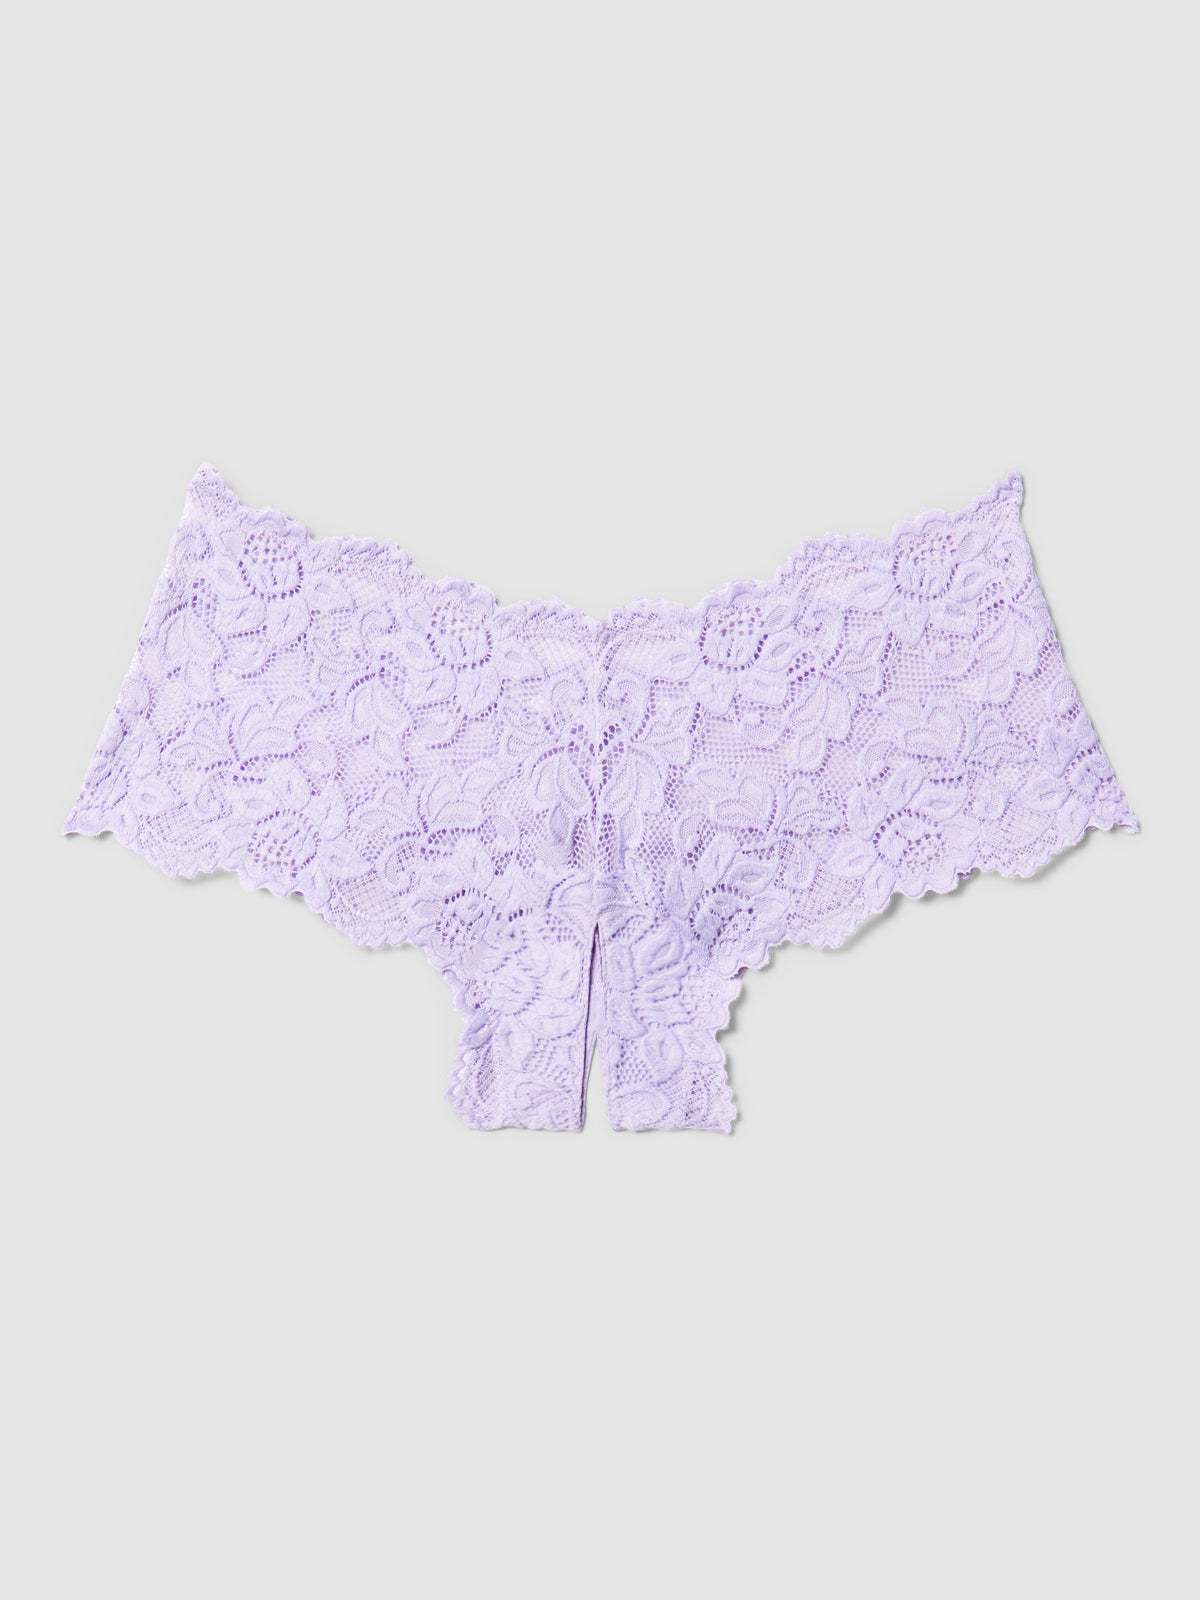 Come Over Later Crotchless Panty - Purple